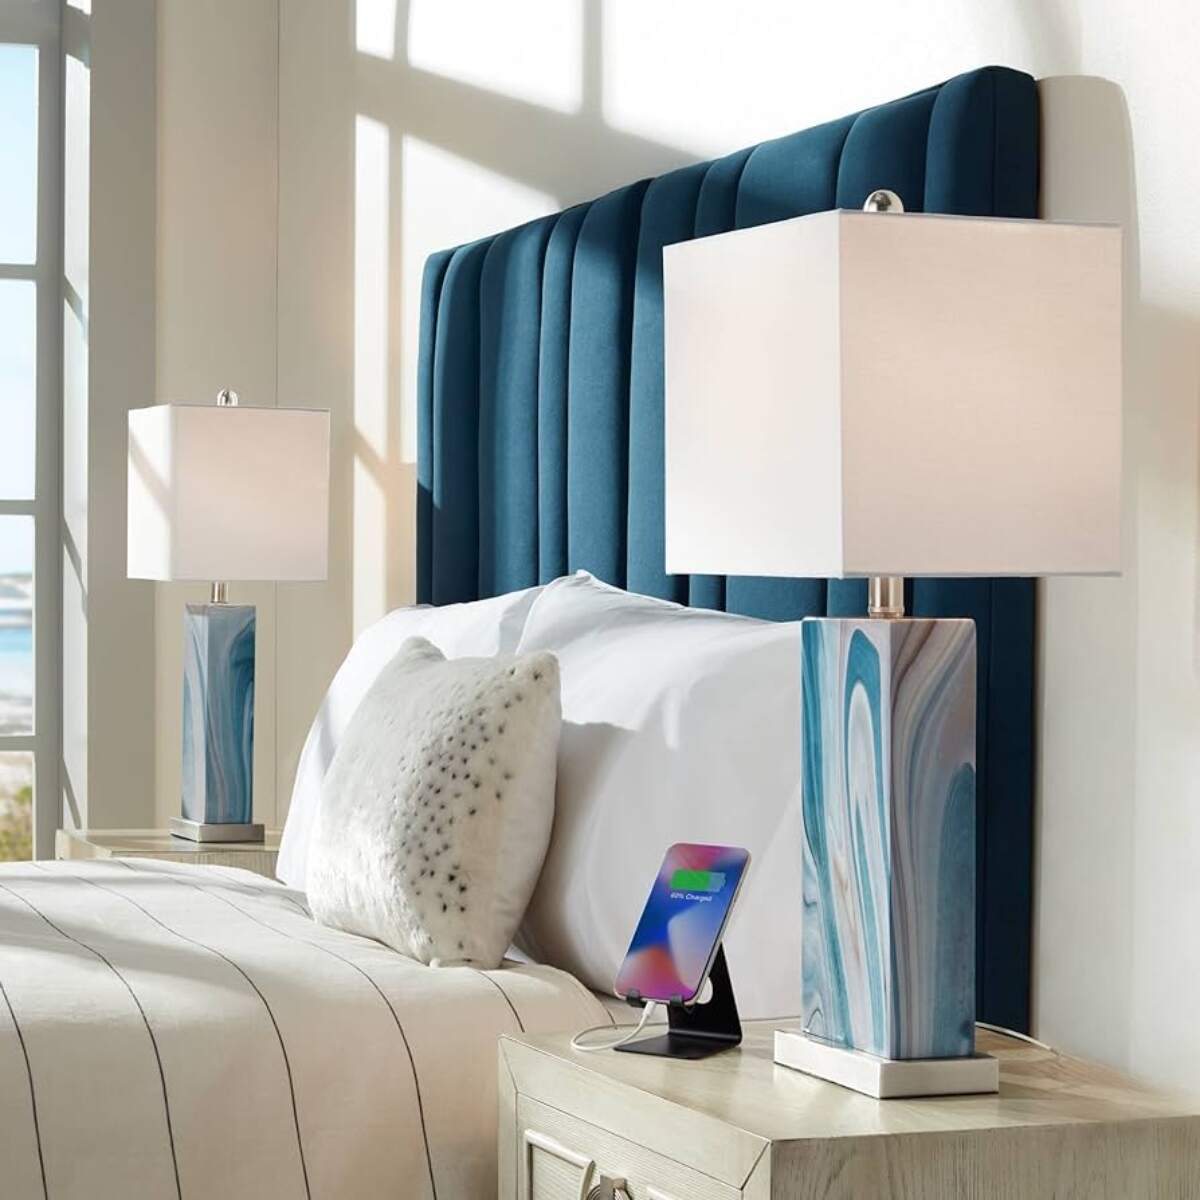 How Tall Should My Bedside Lamp Be